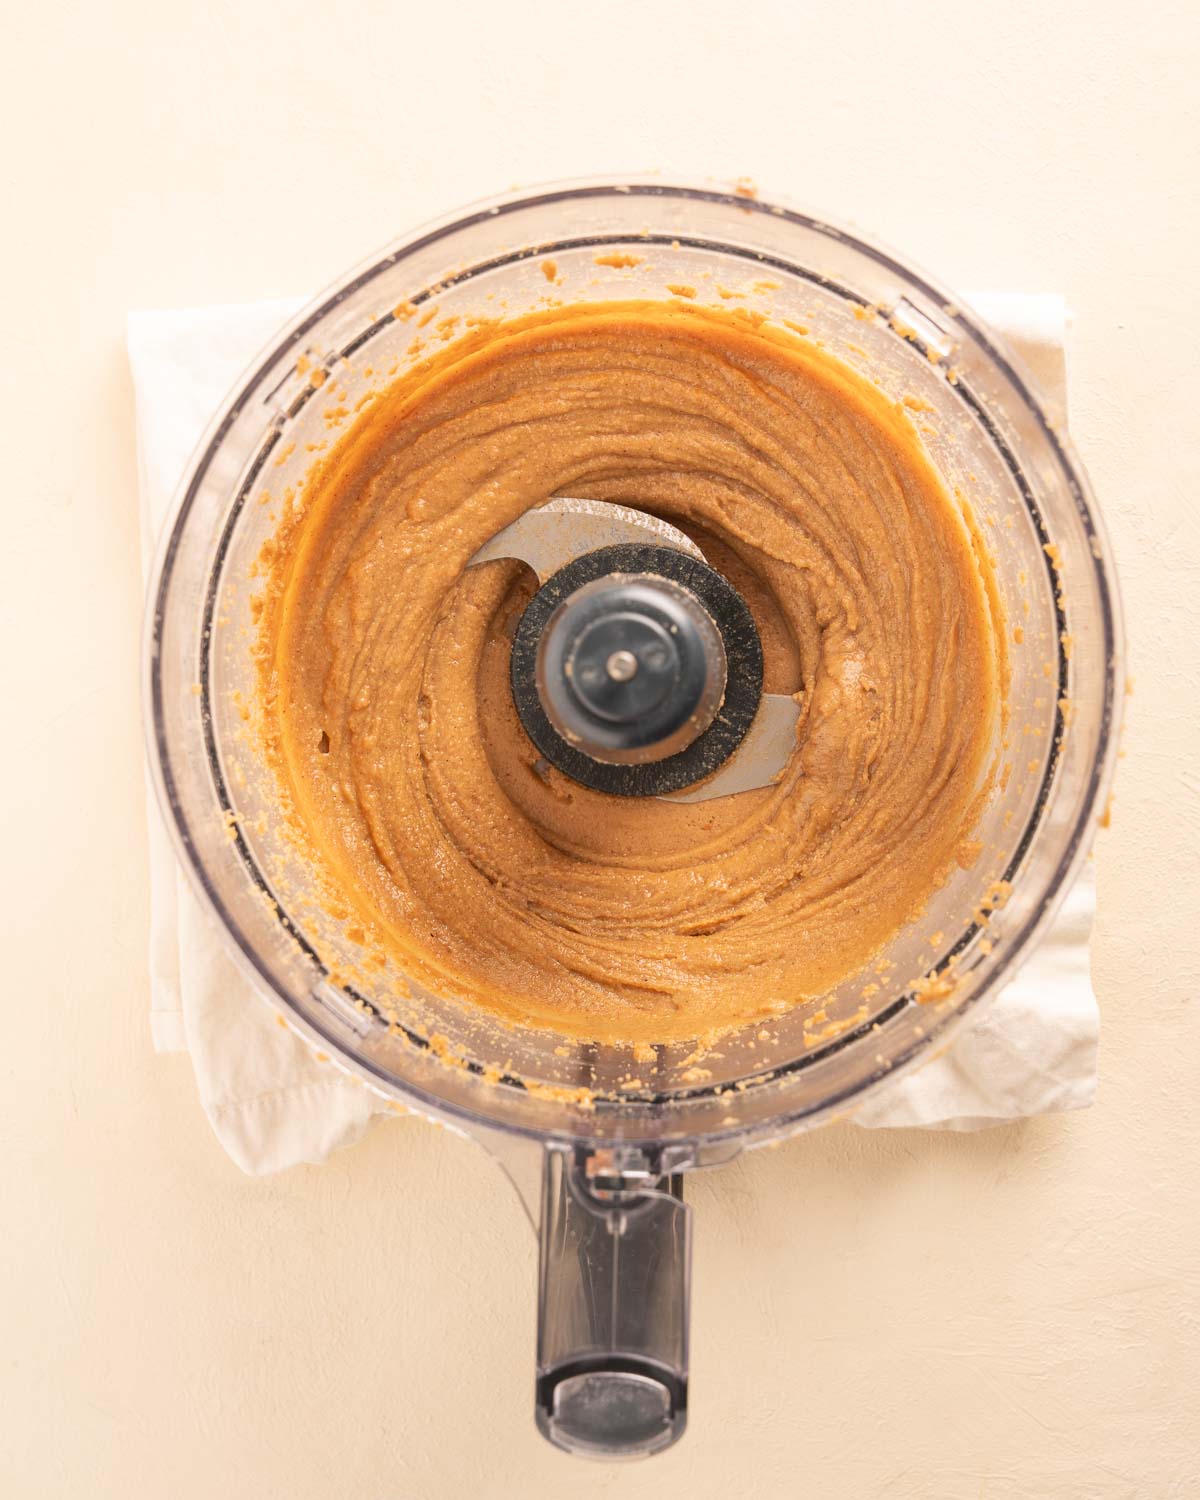 A food processor after the peanuts, maple syrup, vanilla, and cinnamon have been blended into a smooth butter